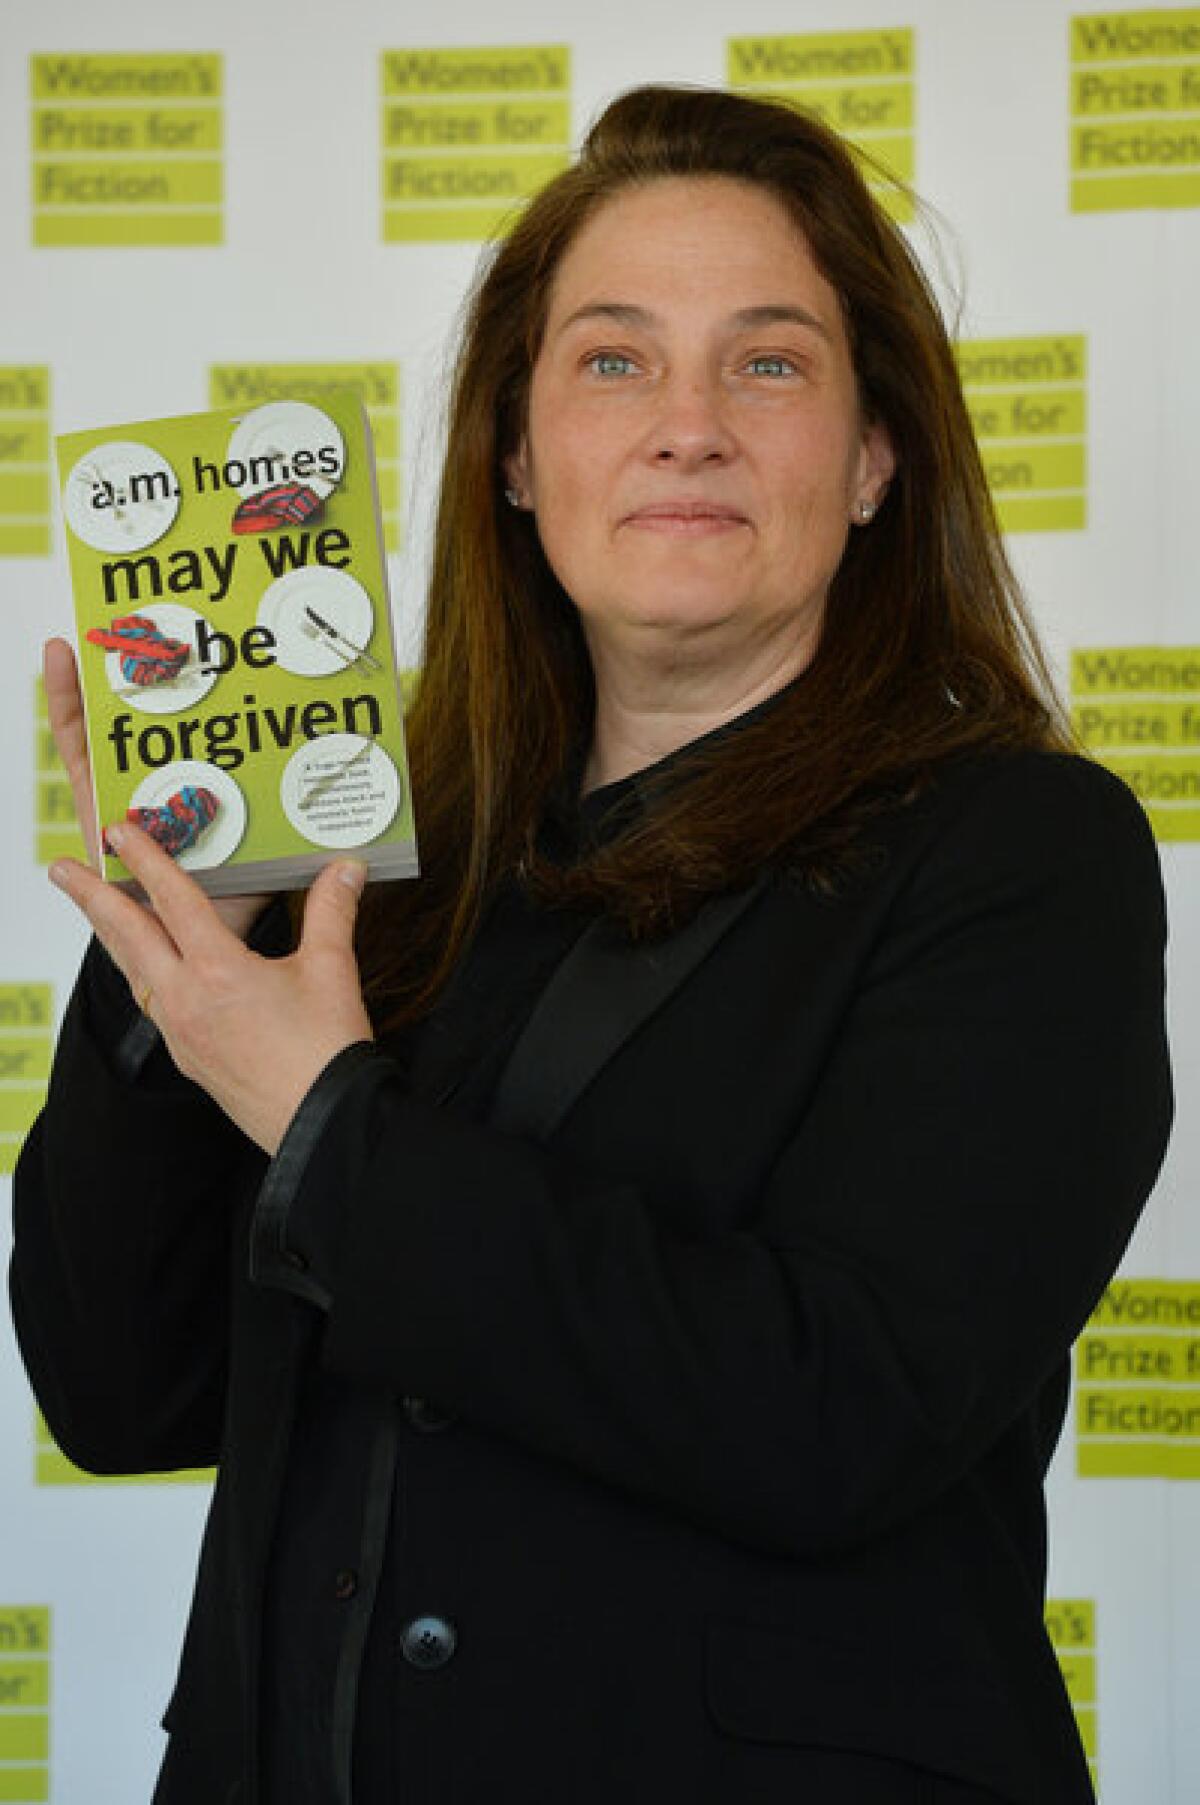 A.M. Homes with her book "May We Be Forgiven," which won the 2013 Women's Prize for Fiction.